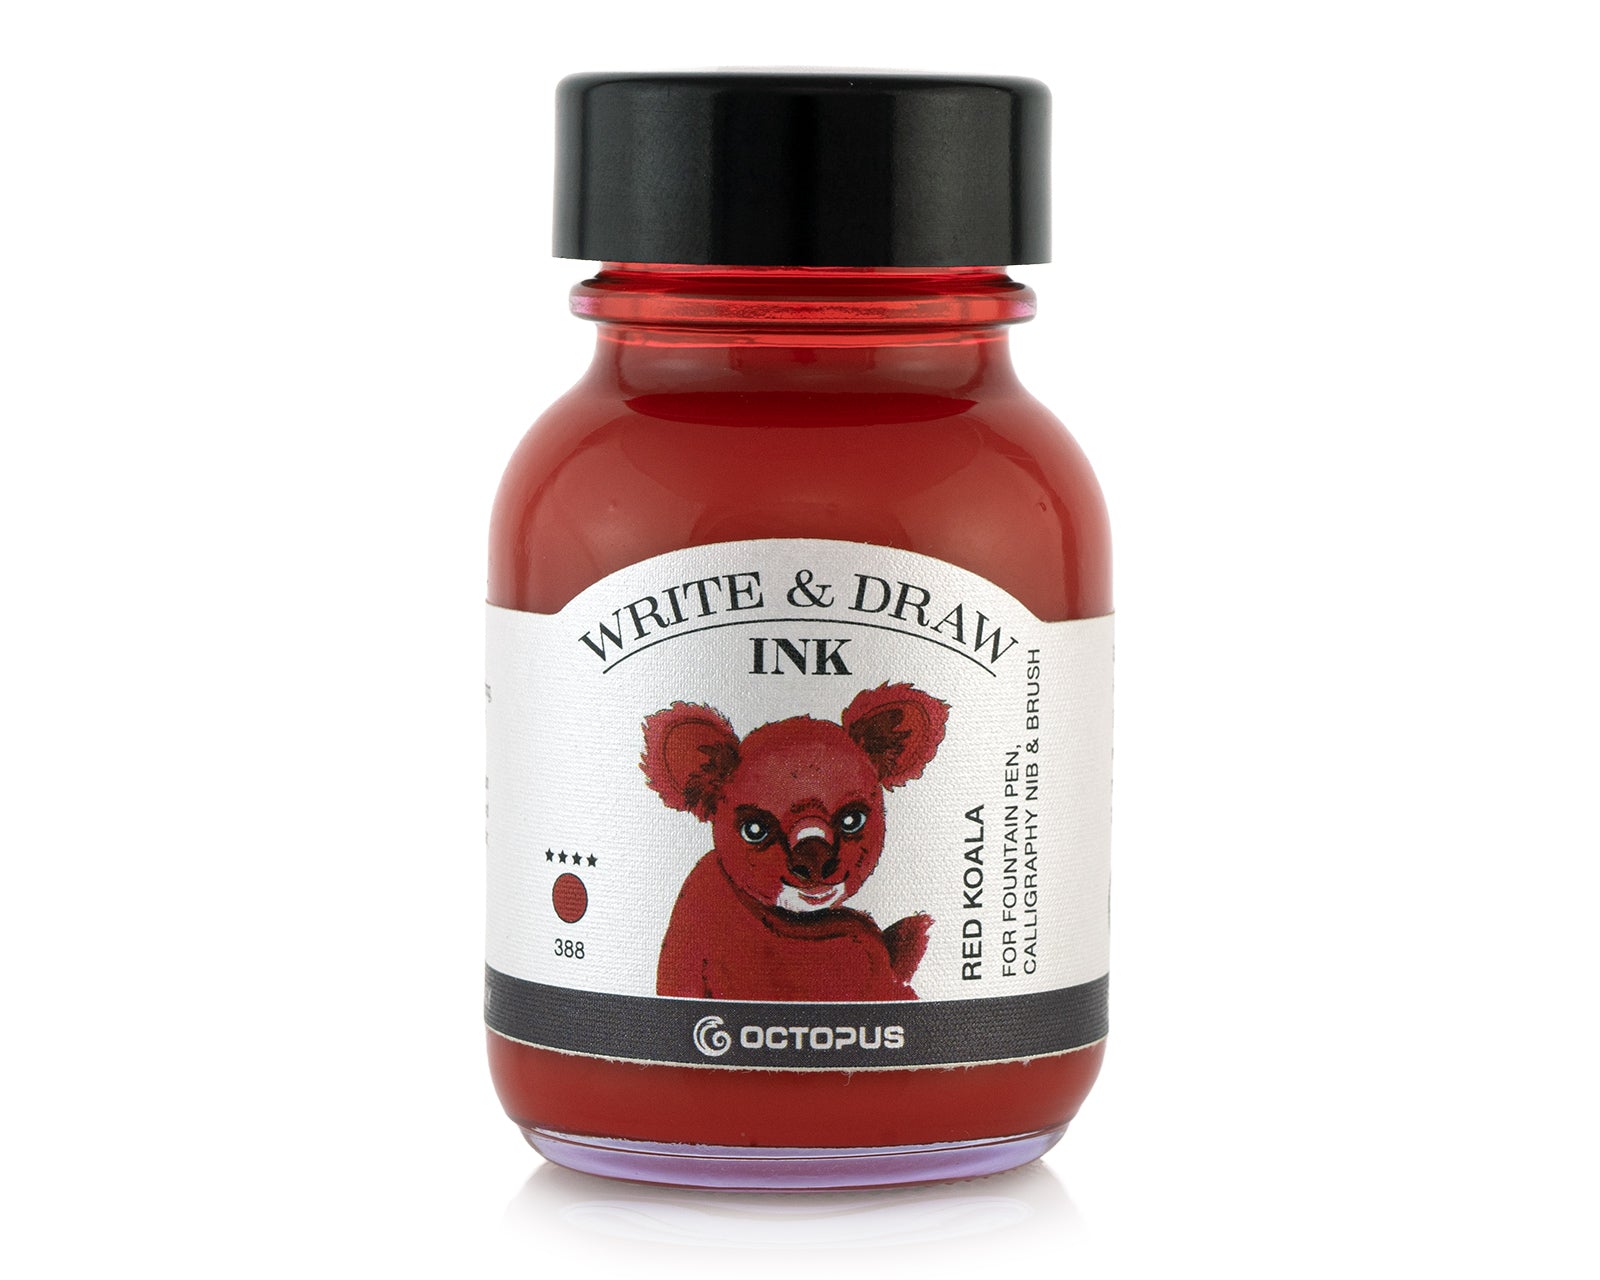 Octopus Write and Draw Ink 388 Red Koala